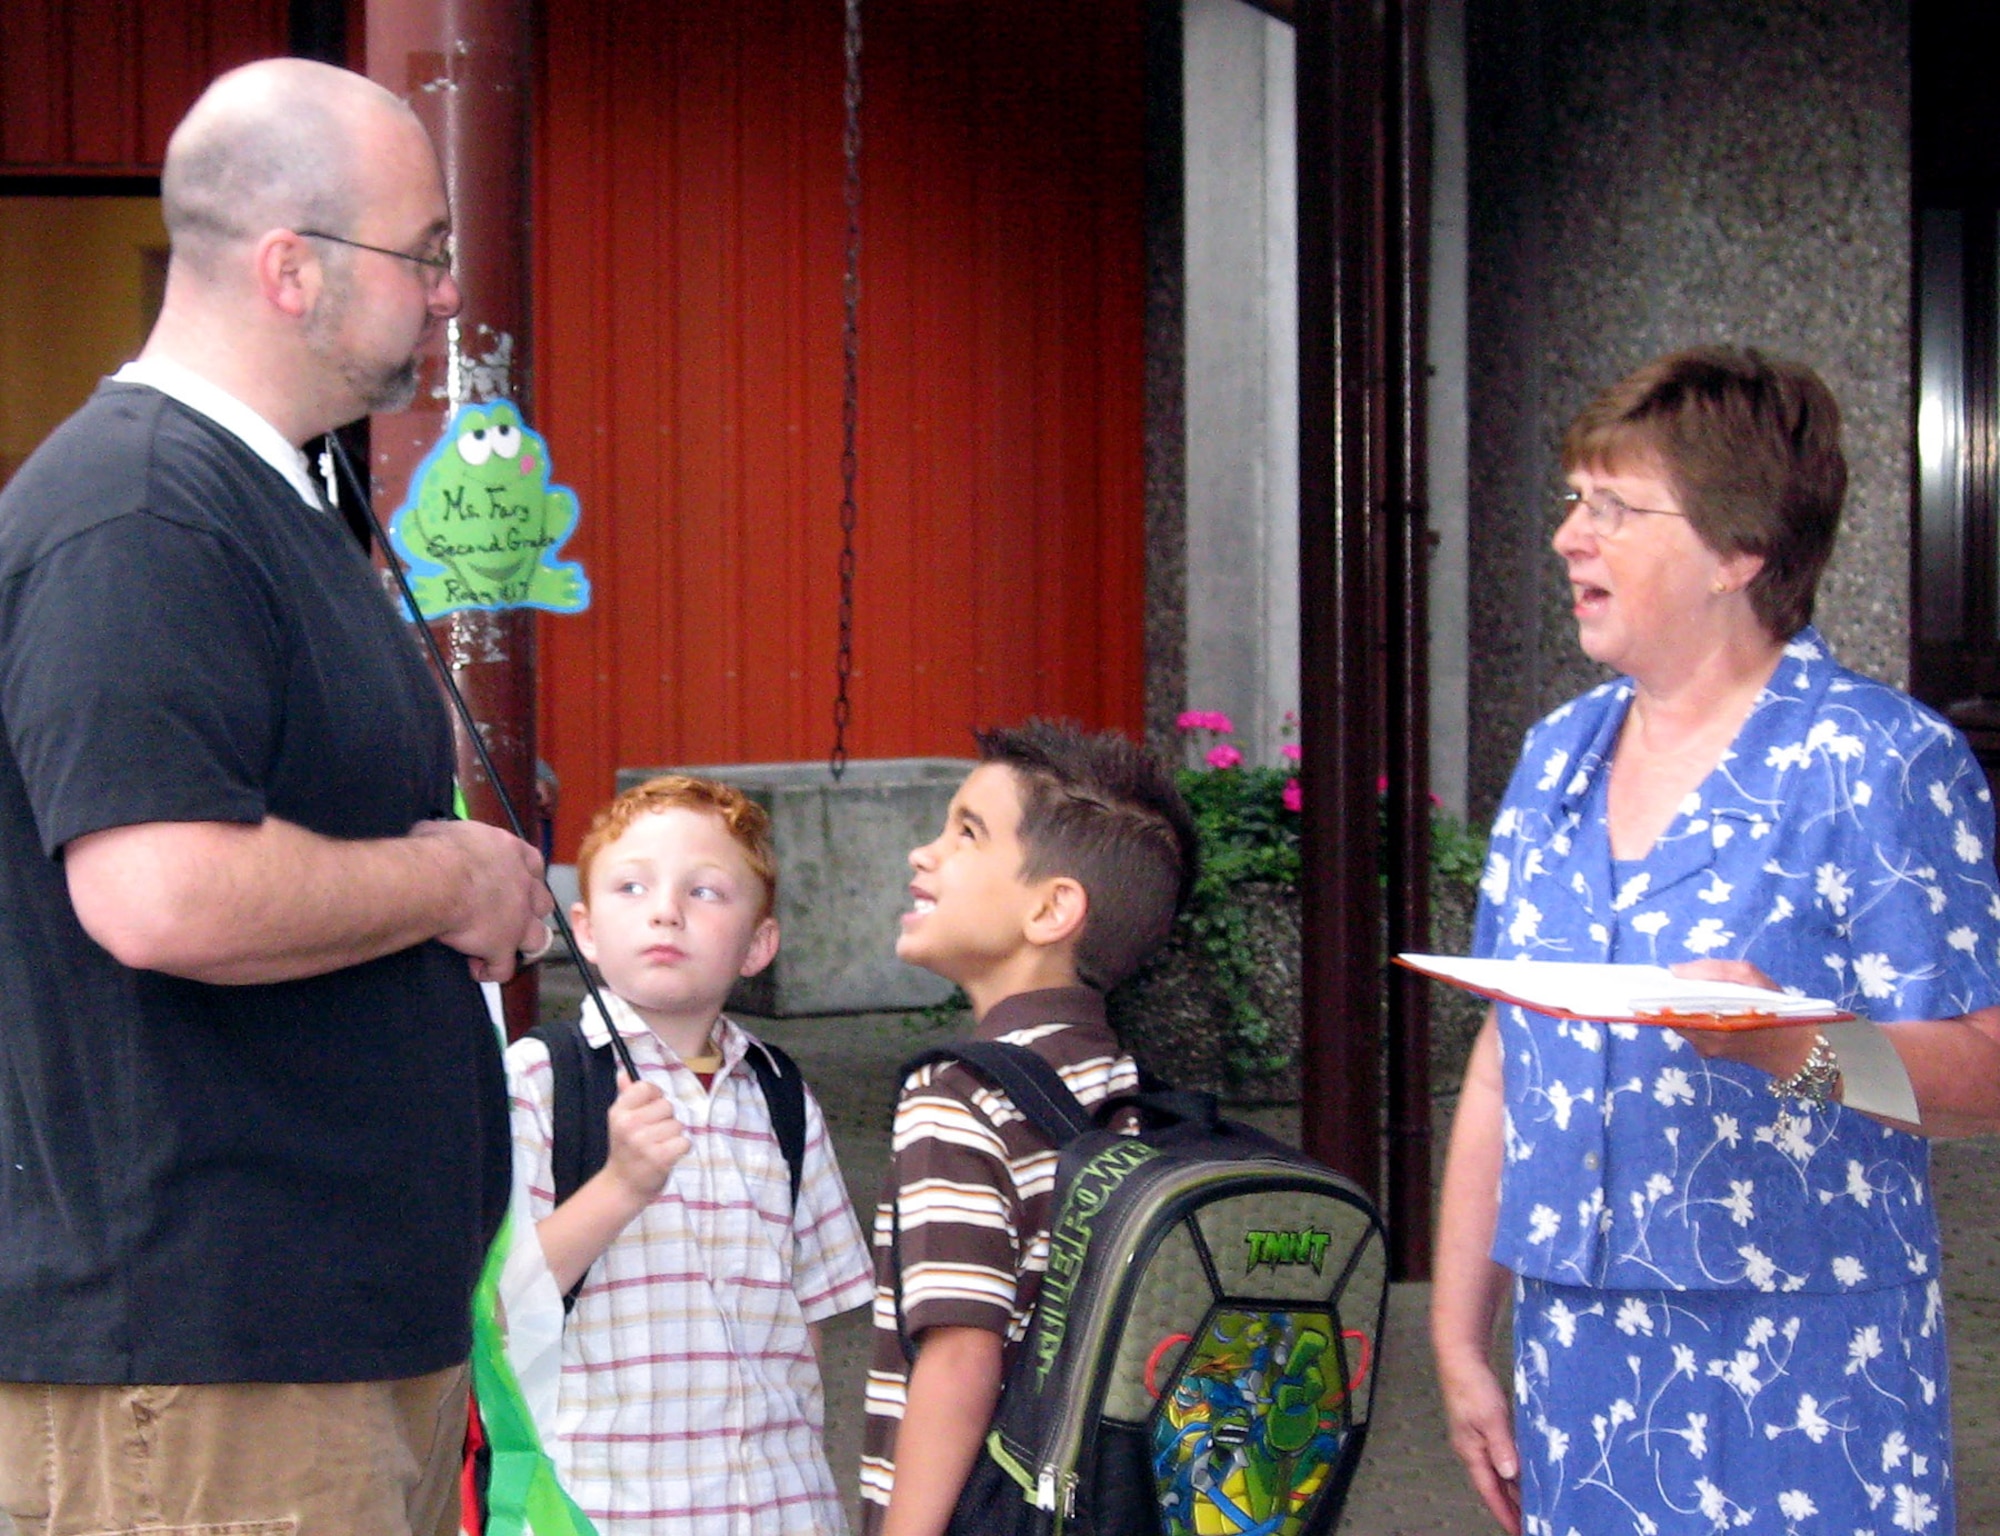 SPANGDAHLEM AIR BASE, Germany – MaryLee Fary, Spangdahlem Elementary School teacher, introduces herself to Jimmy Sloan and his step-son Jordan Franklin-Garza on the first day of second grade Aug. 27. Jordan’s mother is Capt. Judy Sloan from the 52nd Equipment Maintenance Squadron who is currently serving in the area of responsibility. (U.S. Air Force photo/Staff Sgt. Tammie Moore)